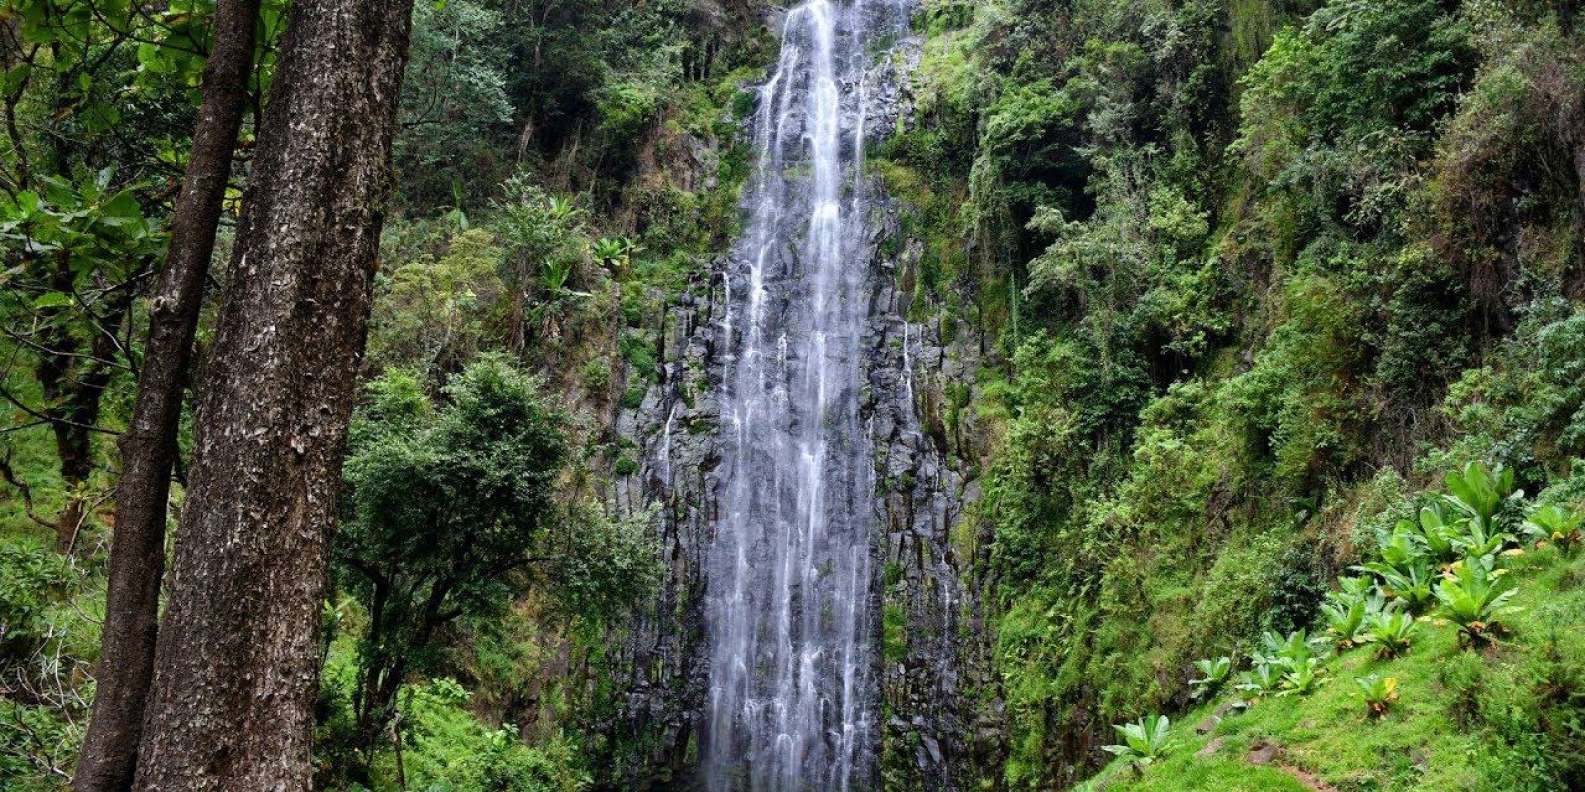 <b>Materuni water fall</b> is one if the impressive water fall found around <b>Kilimanjaro national park</b>, it is one of the tallest waterfalls having 70 m height to its basin.